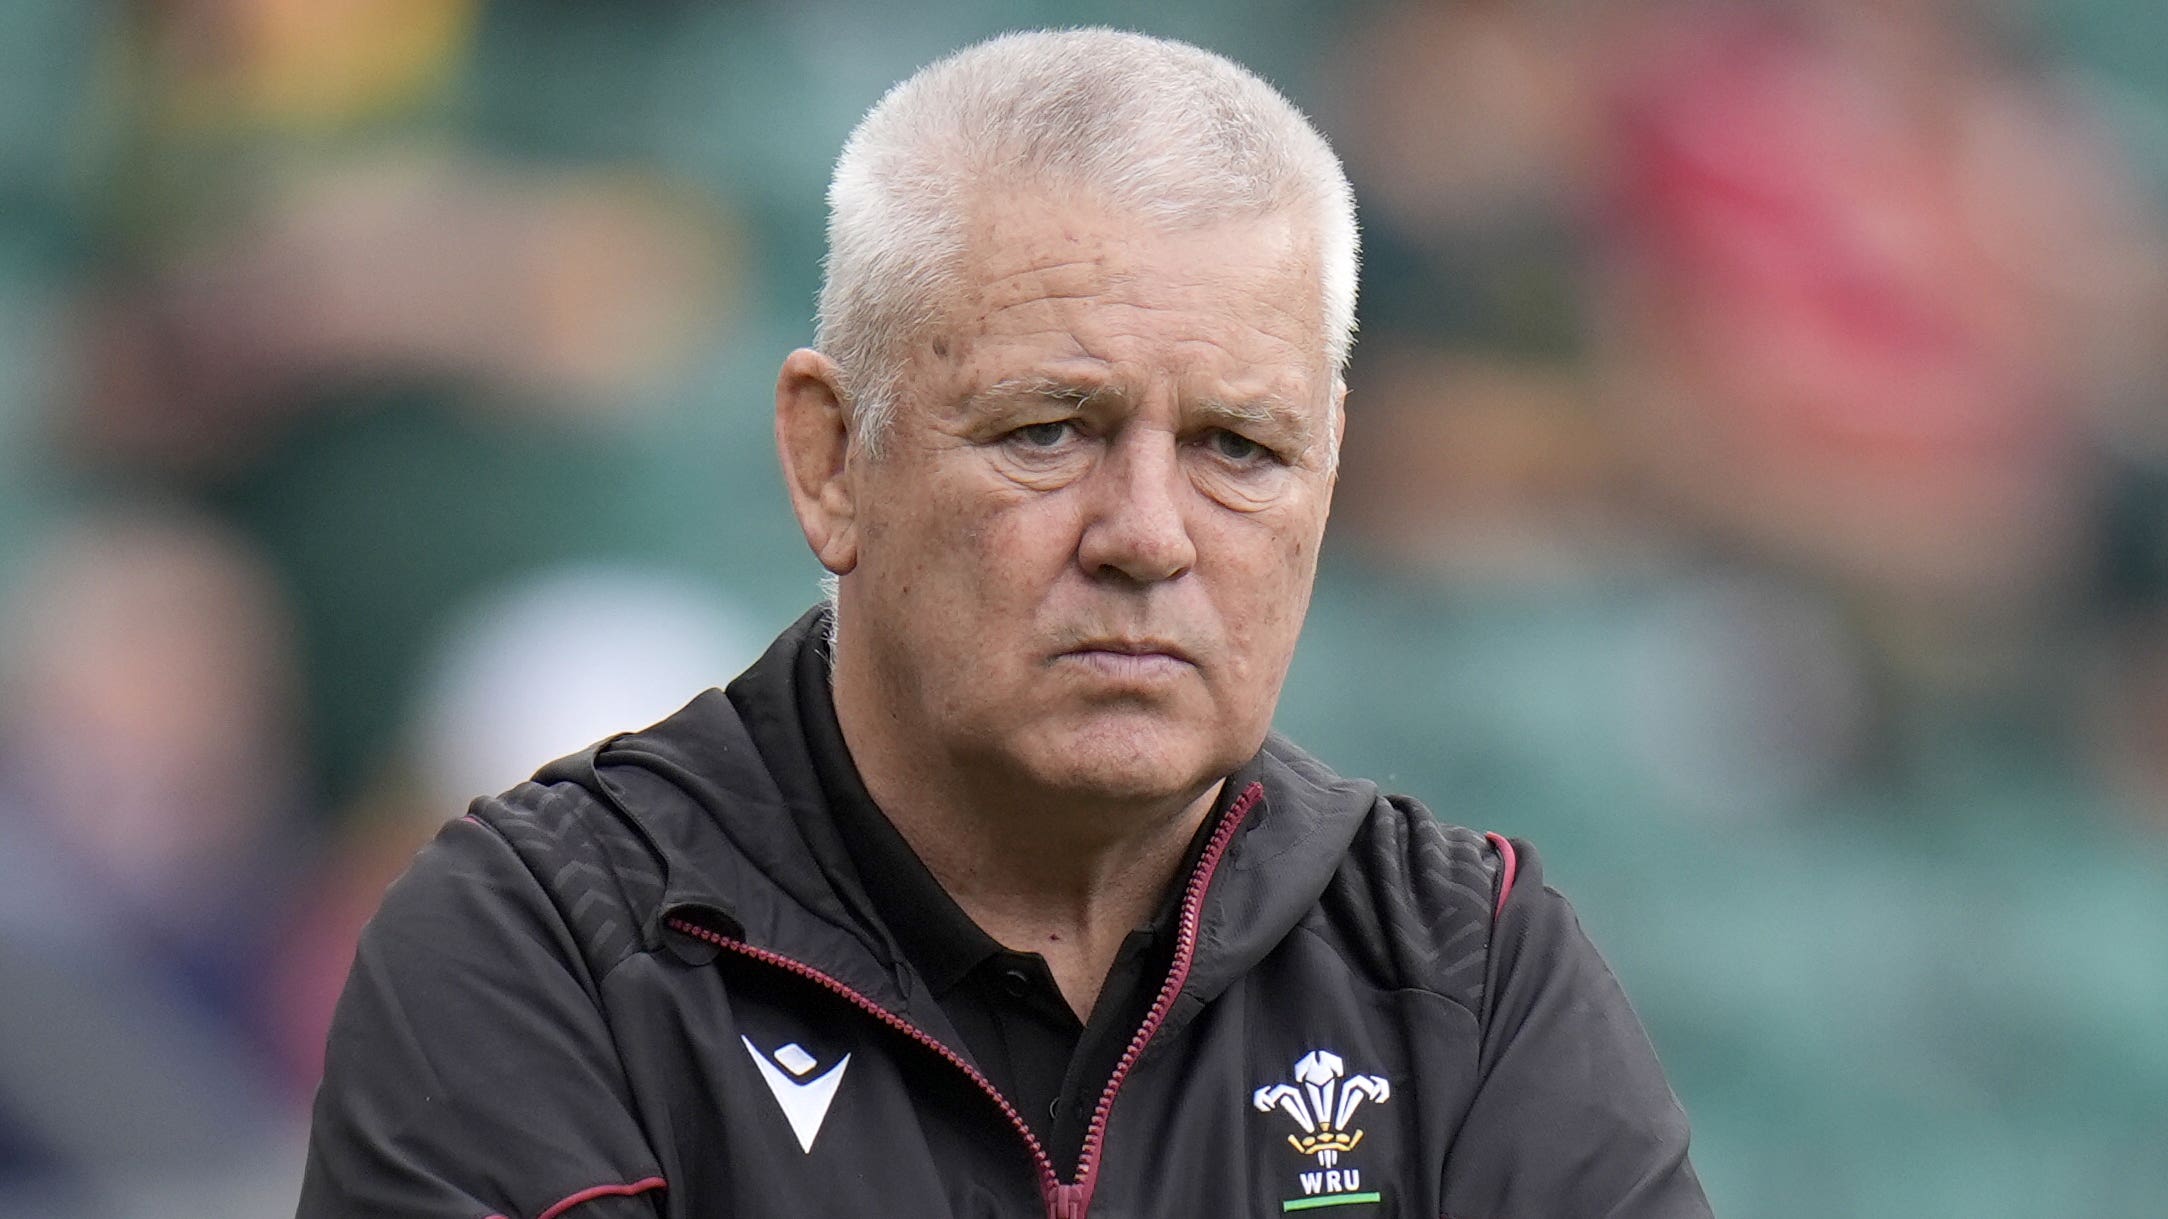 Warren Gatland says Wales have got to stay ‘in the arm-wrestle’ amid losing run